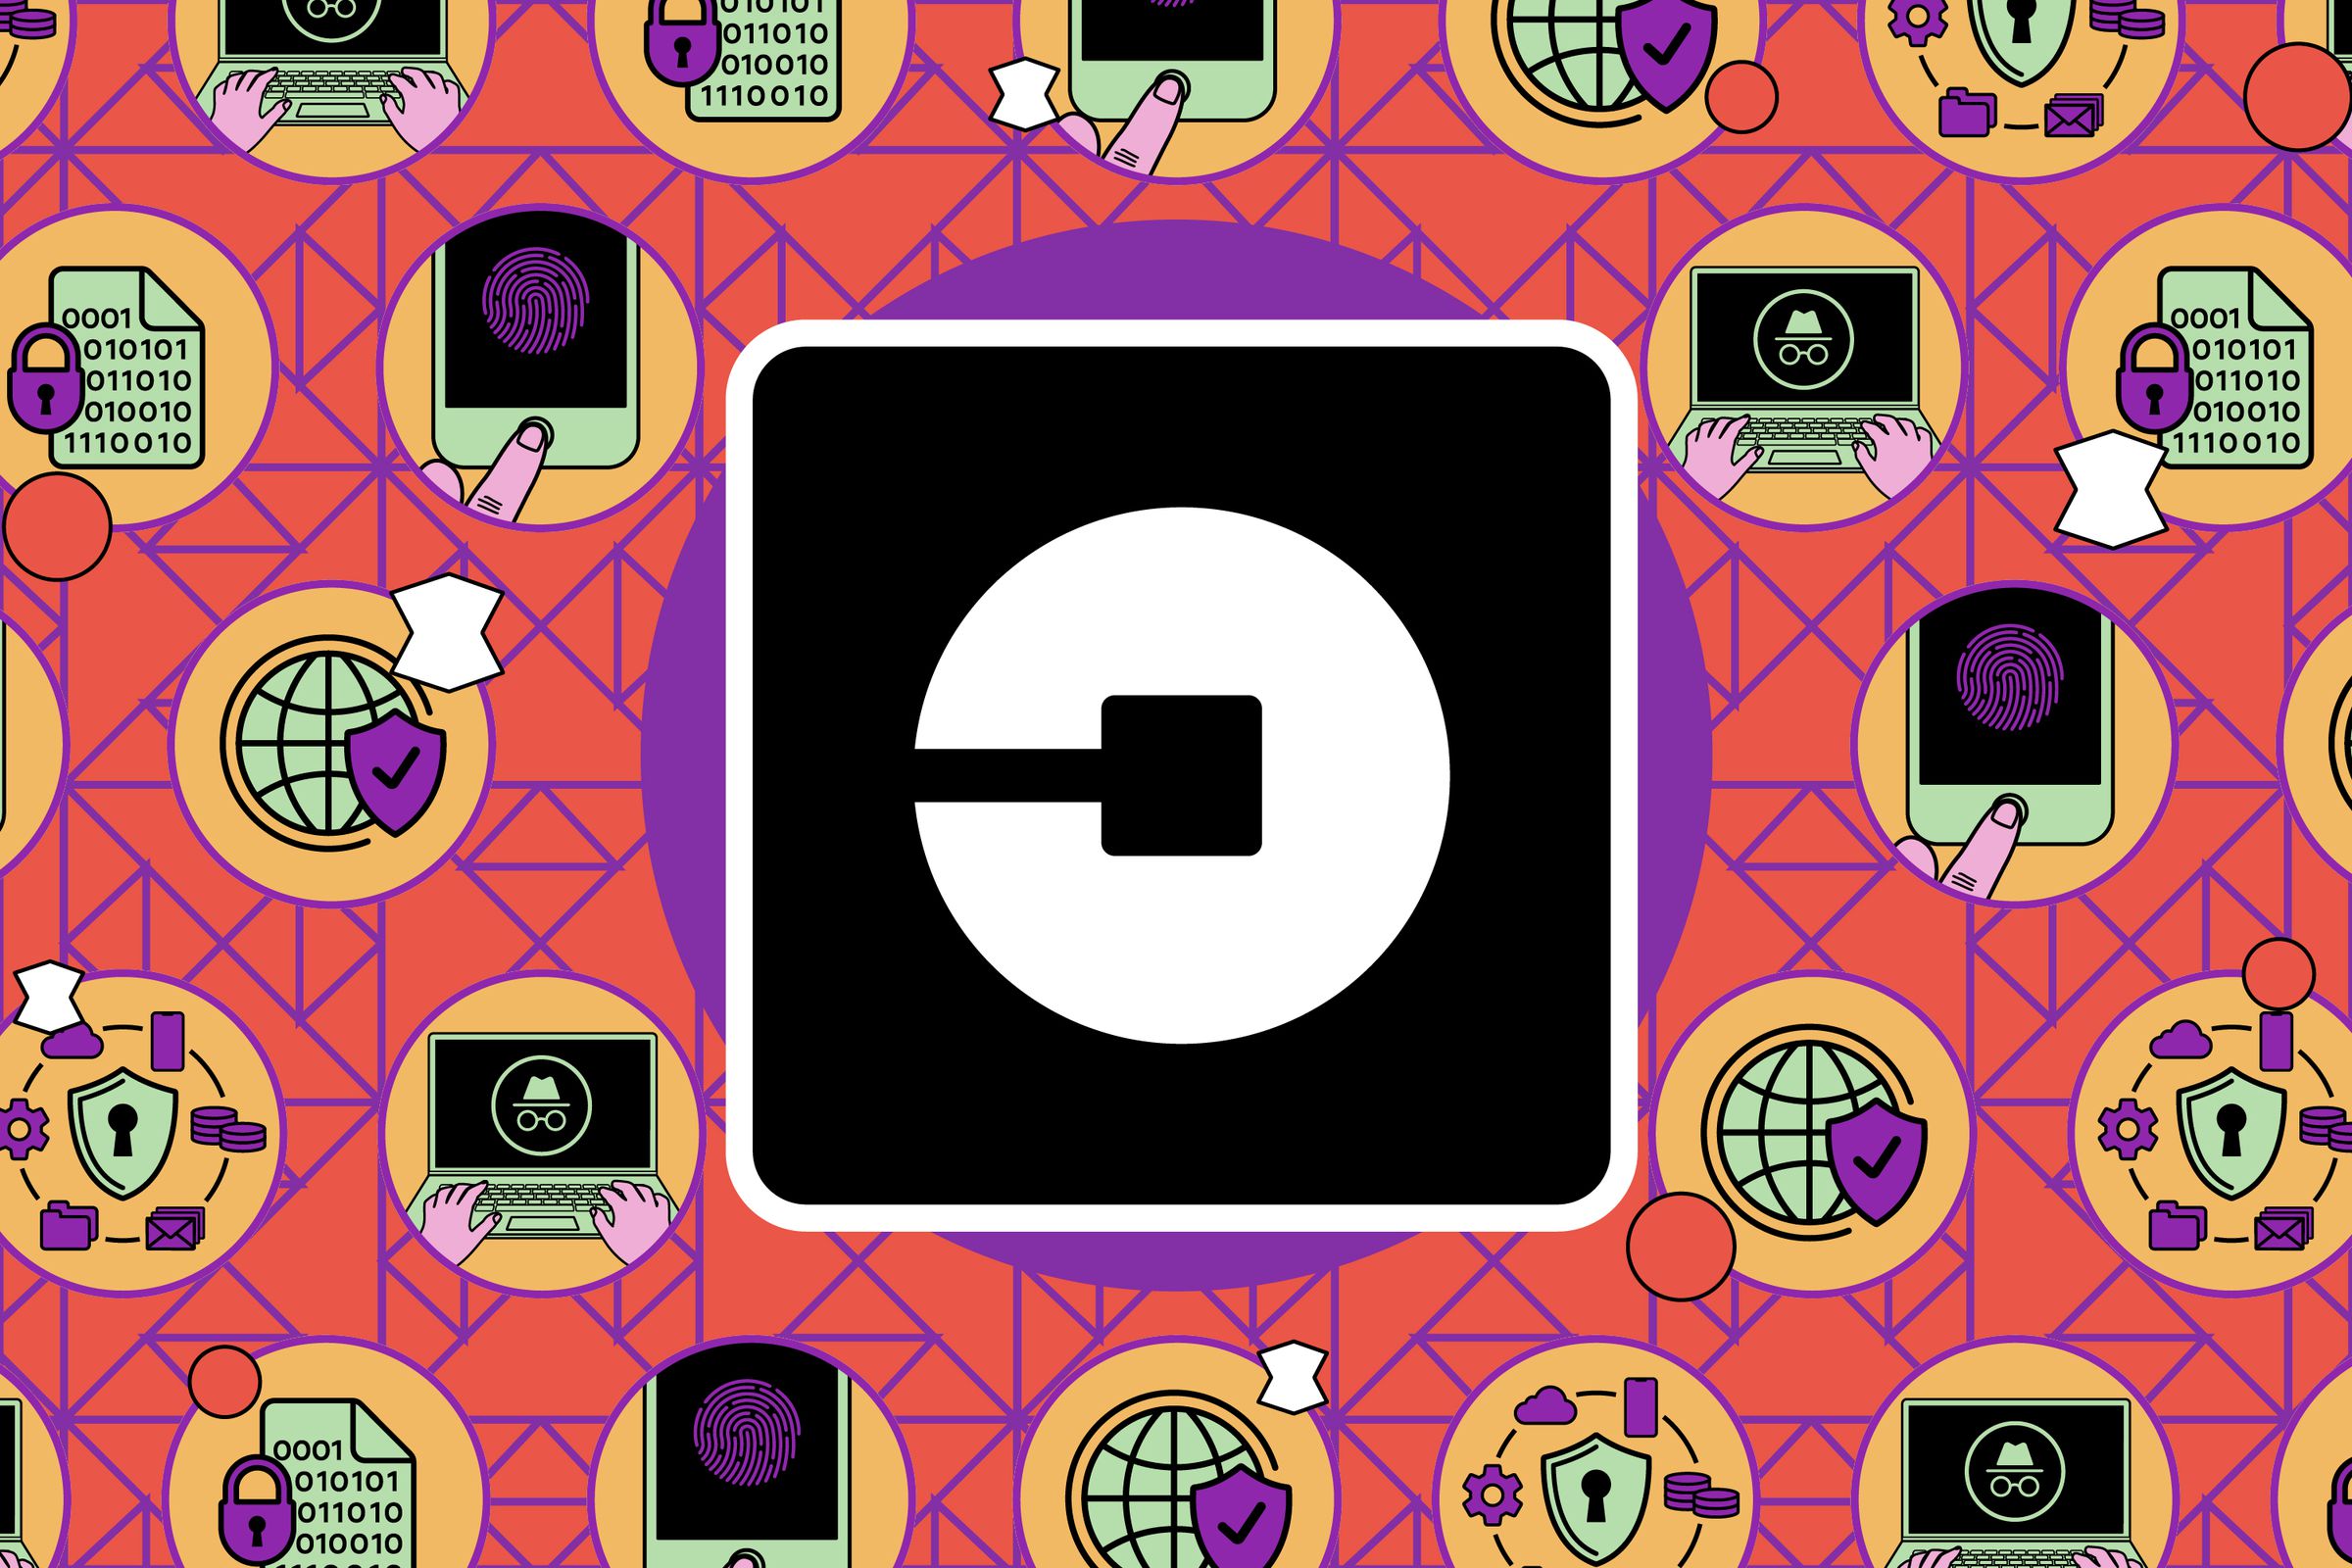 Vector illustration of the Uber app icon over a background of privacy imagery.